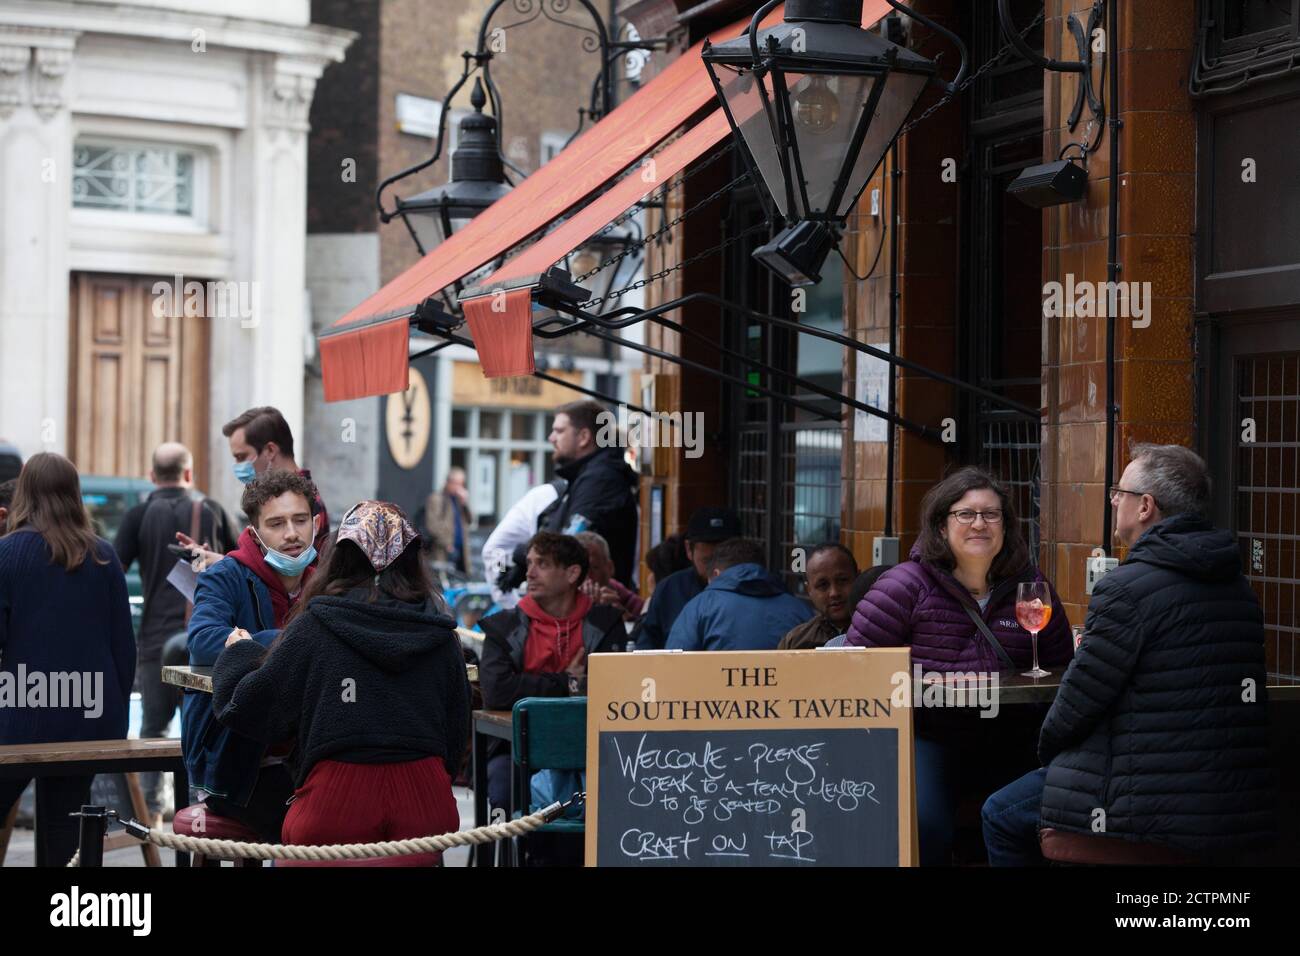 London. UK weather, 24 Sept 2020: Customers outside pubs in London's Borough Market take advantage of a dry spell before more rain is forecast. New coronavirus regulations limit social groups to six under the Rule of Six, and from today staff in restaurants, pubs and cafes must wear face masks. Anna Watson/Alamy Live News Stock Photo